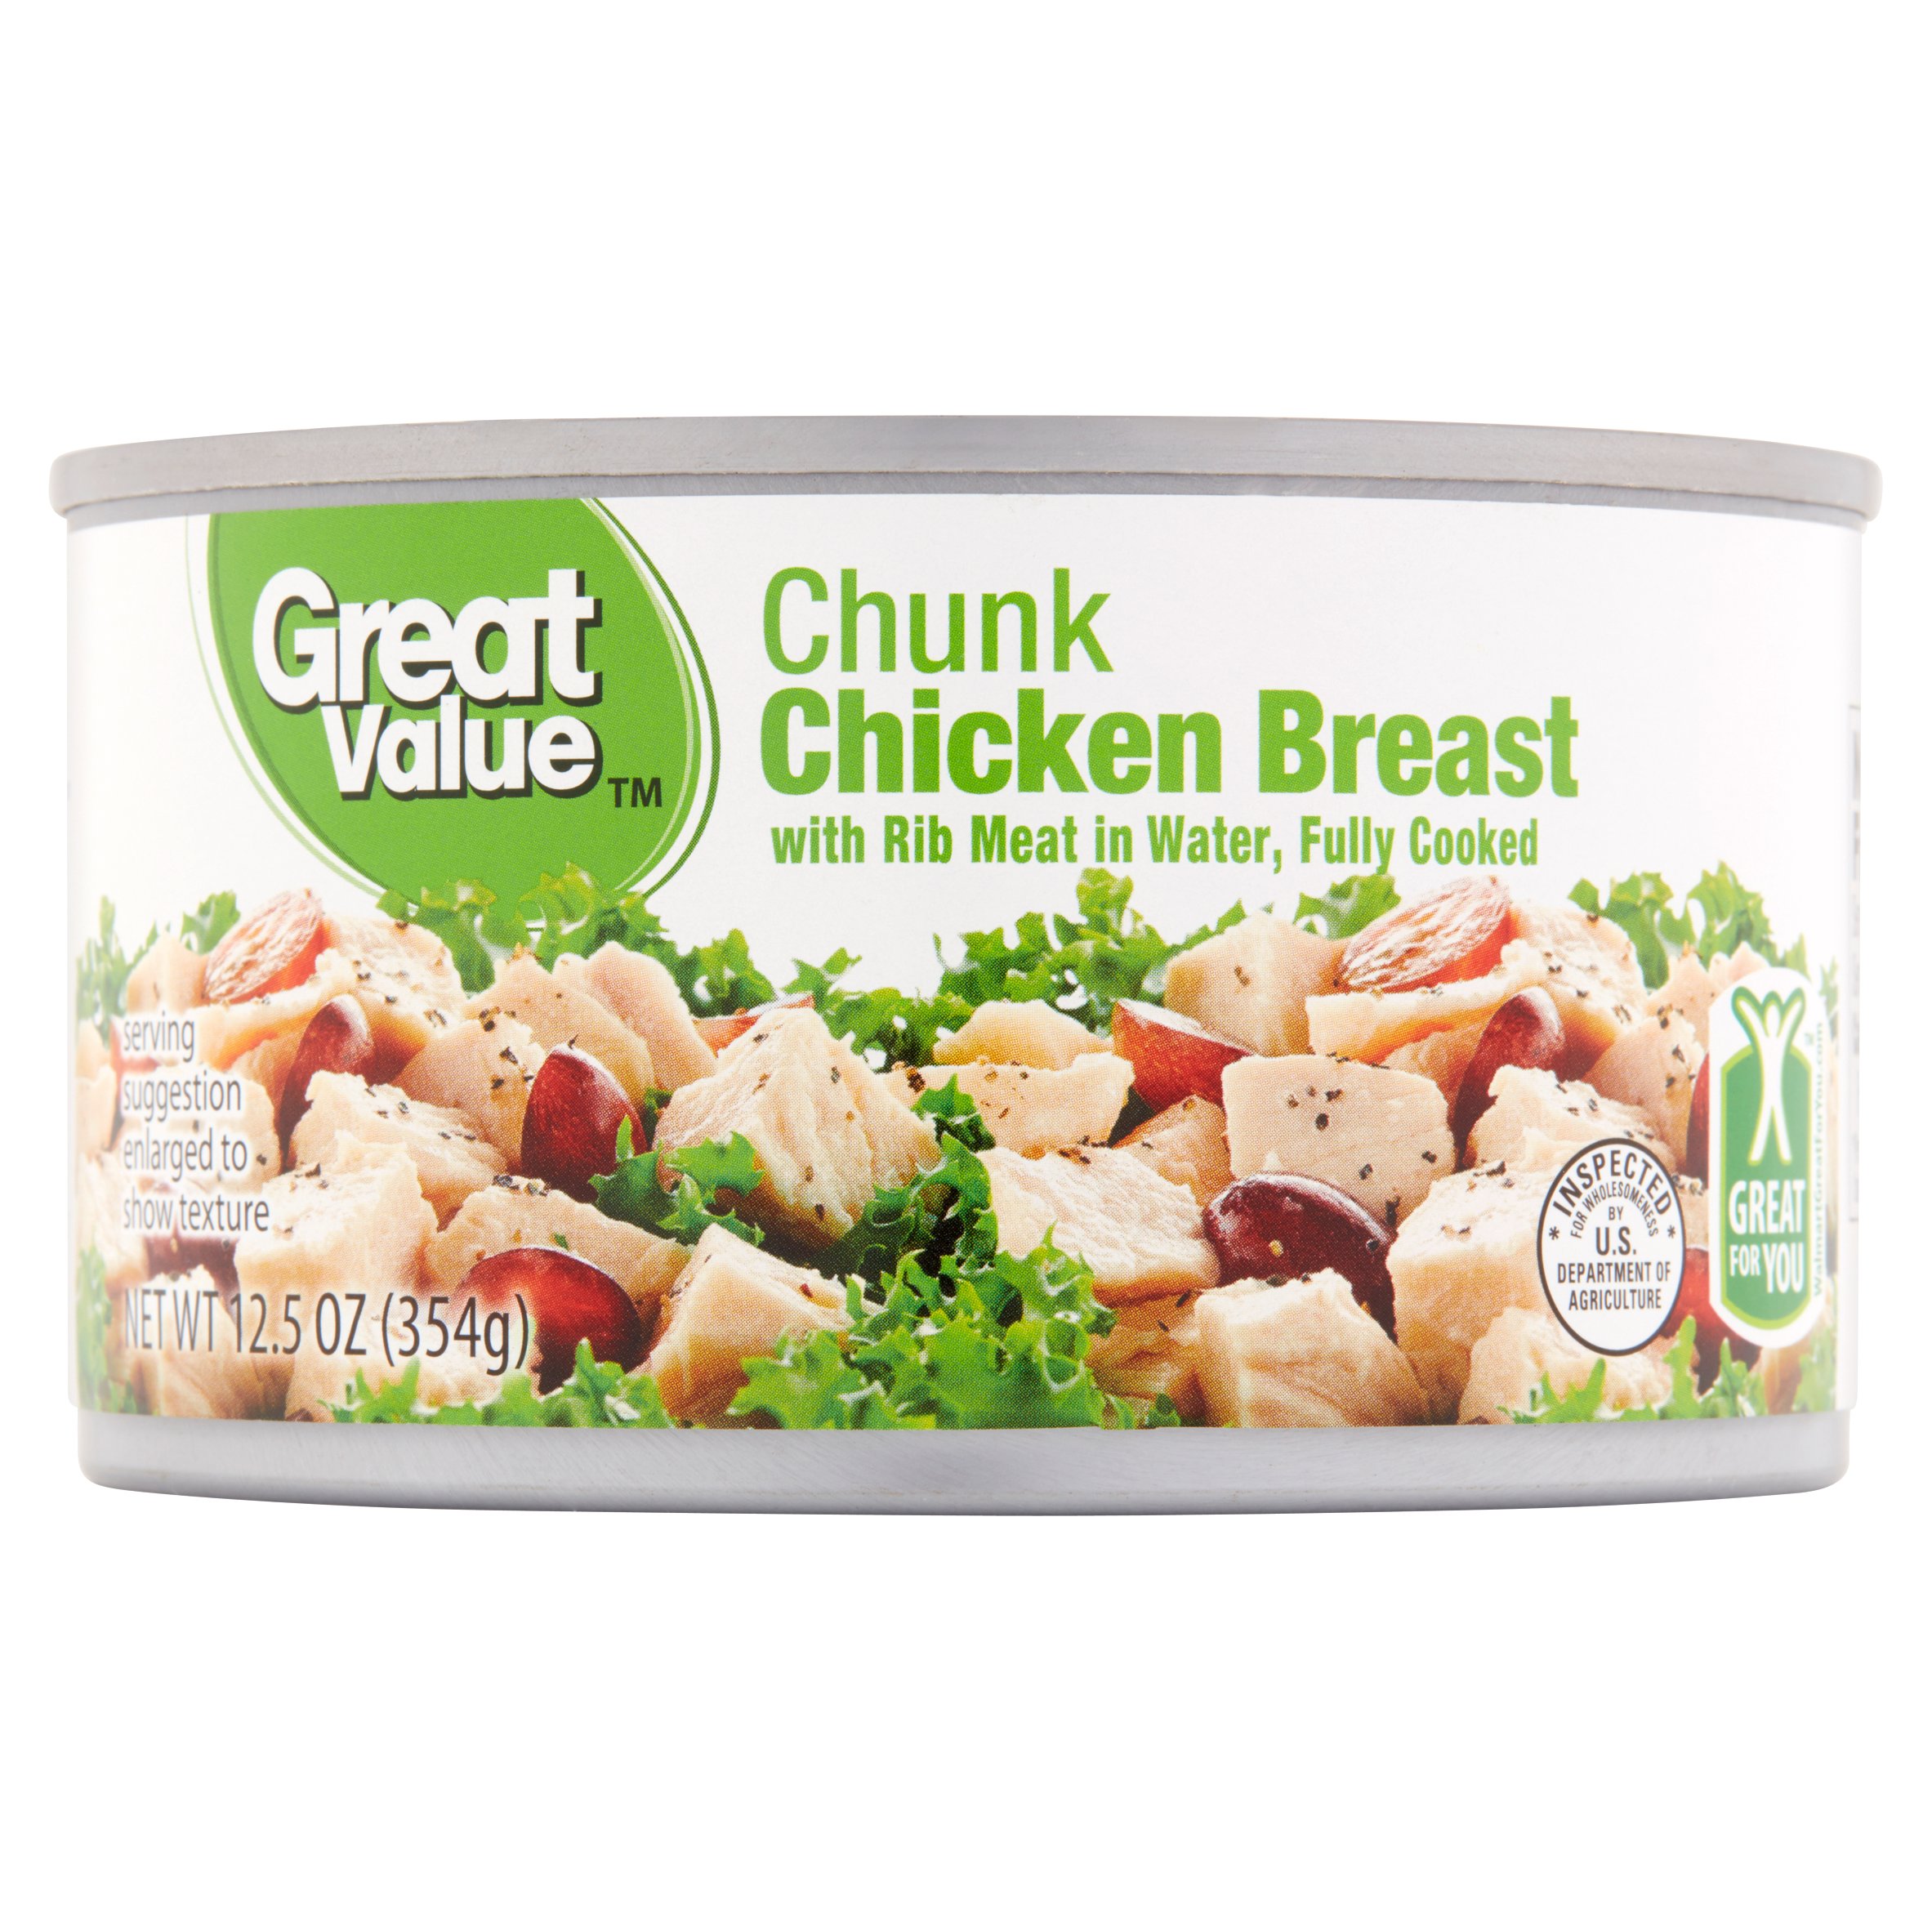 Great Value Premium Fully Cooked Chunk Chicken